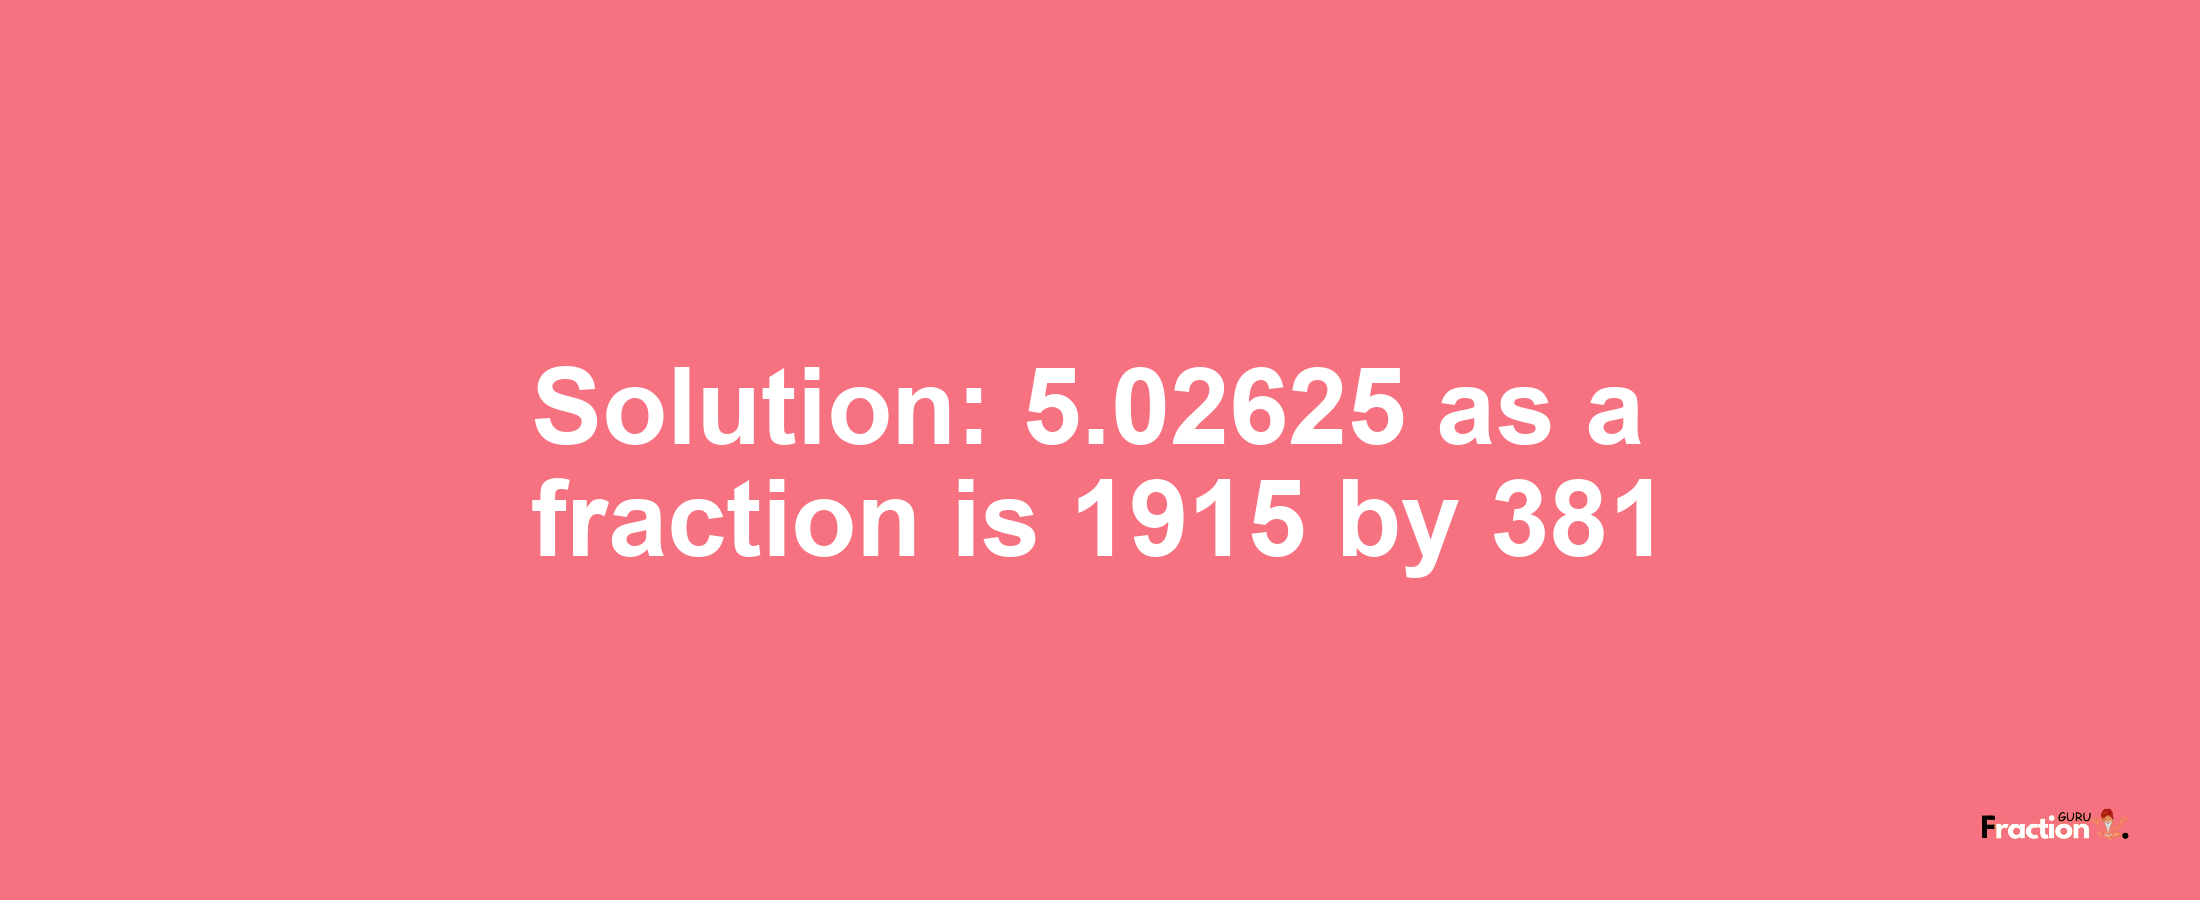 Solution:5.02625 as a fraction is 1915/381